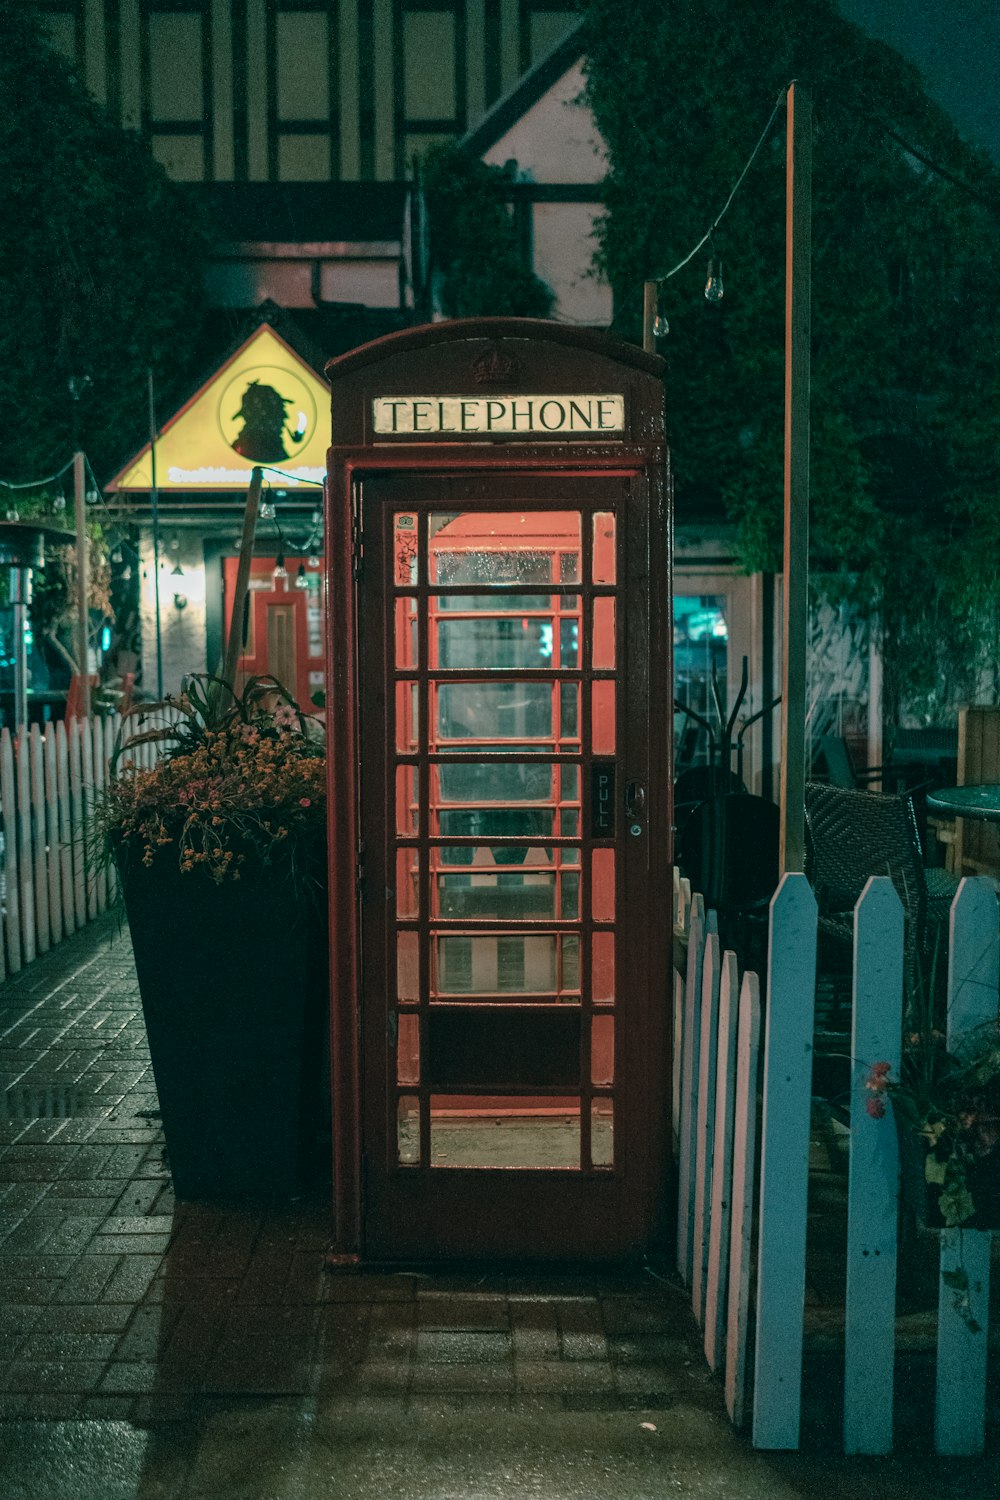 brown Telephone booth in lighted park